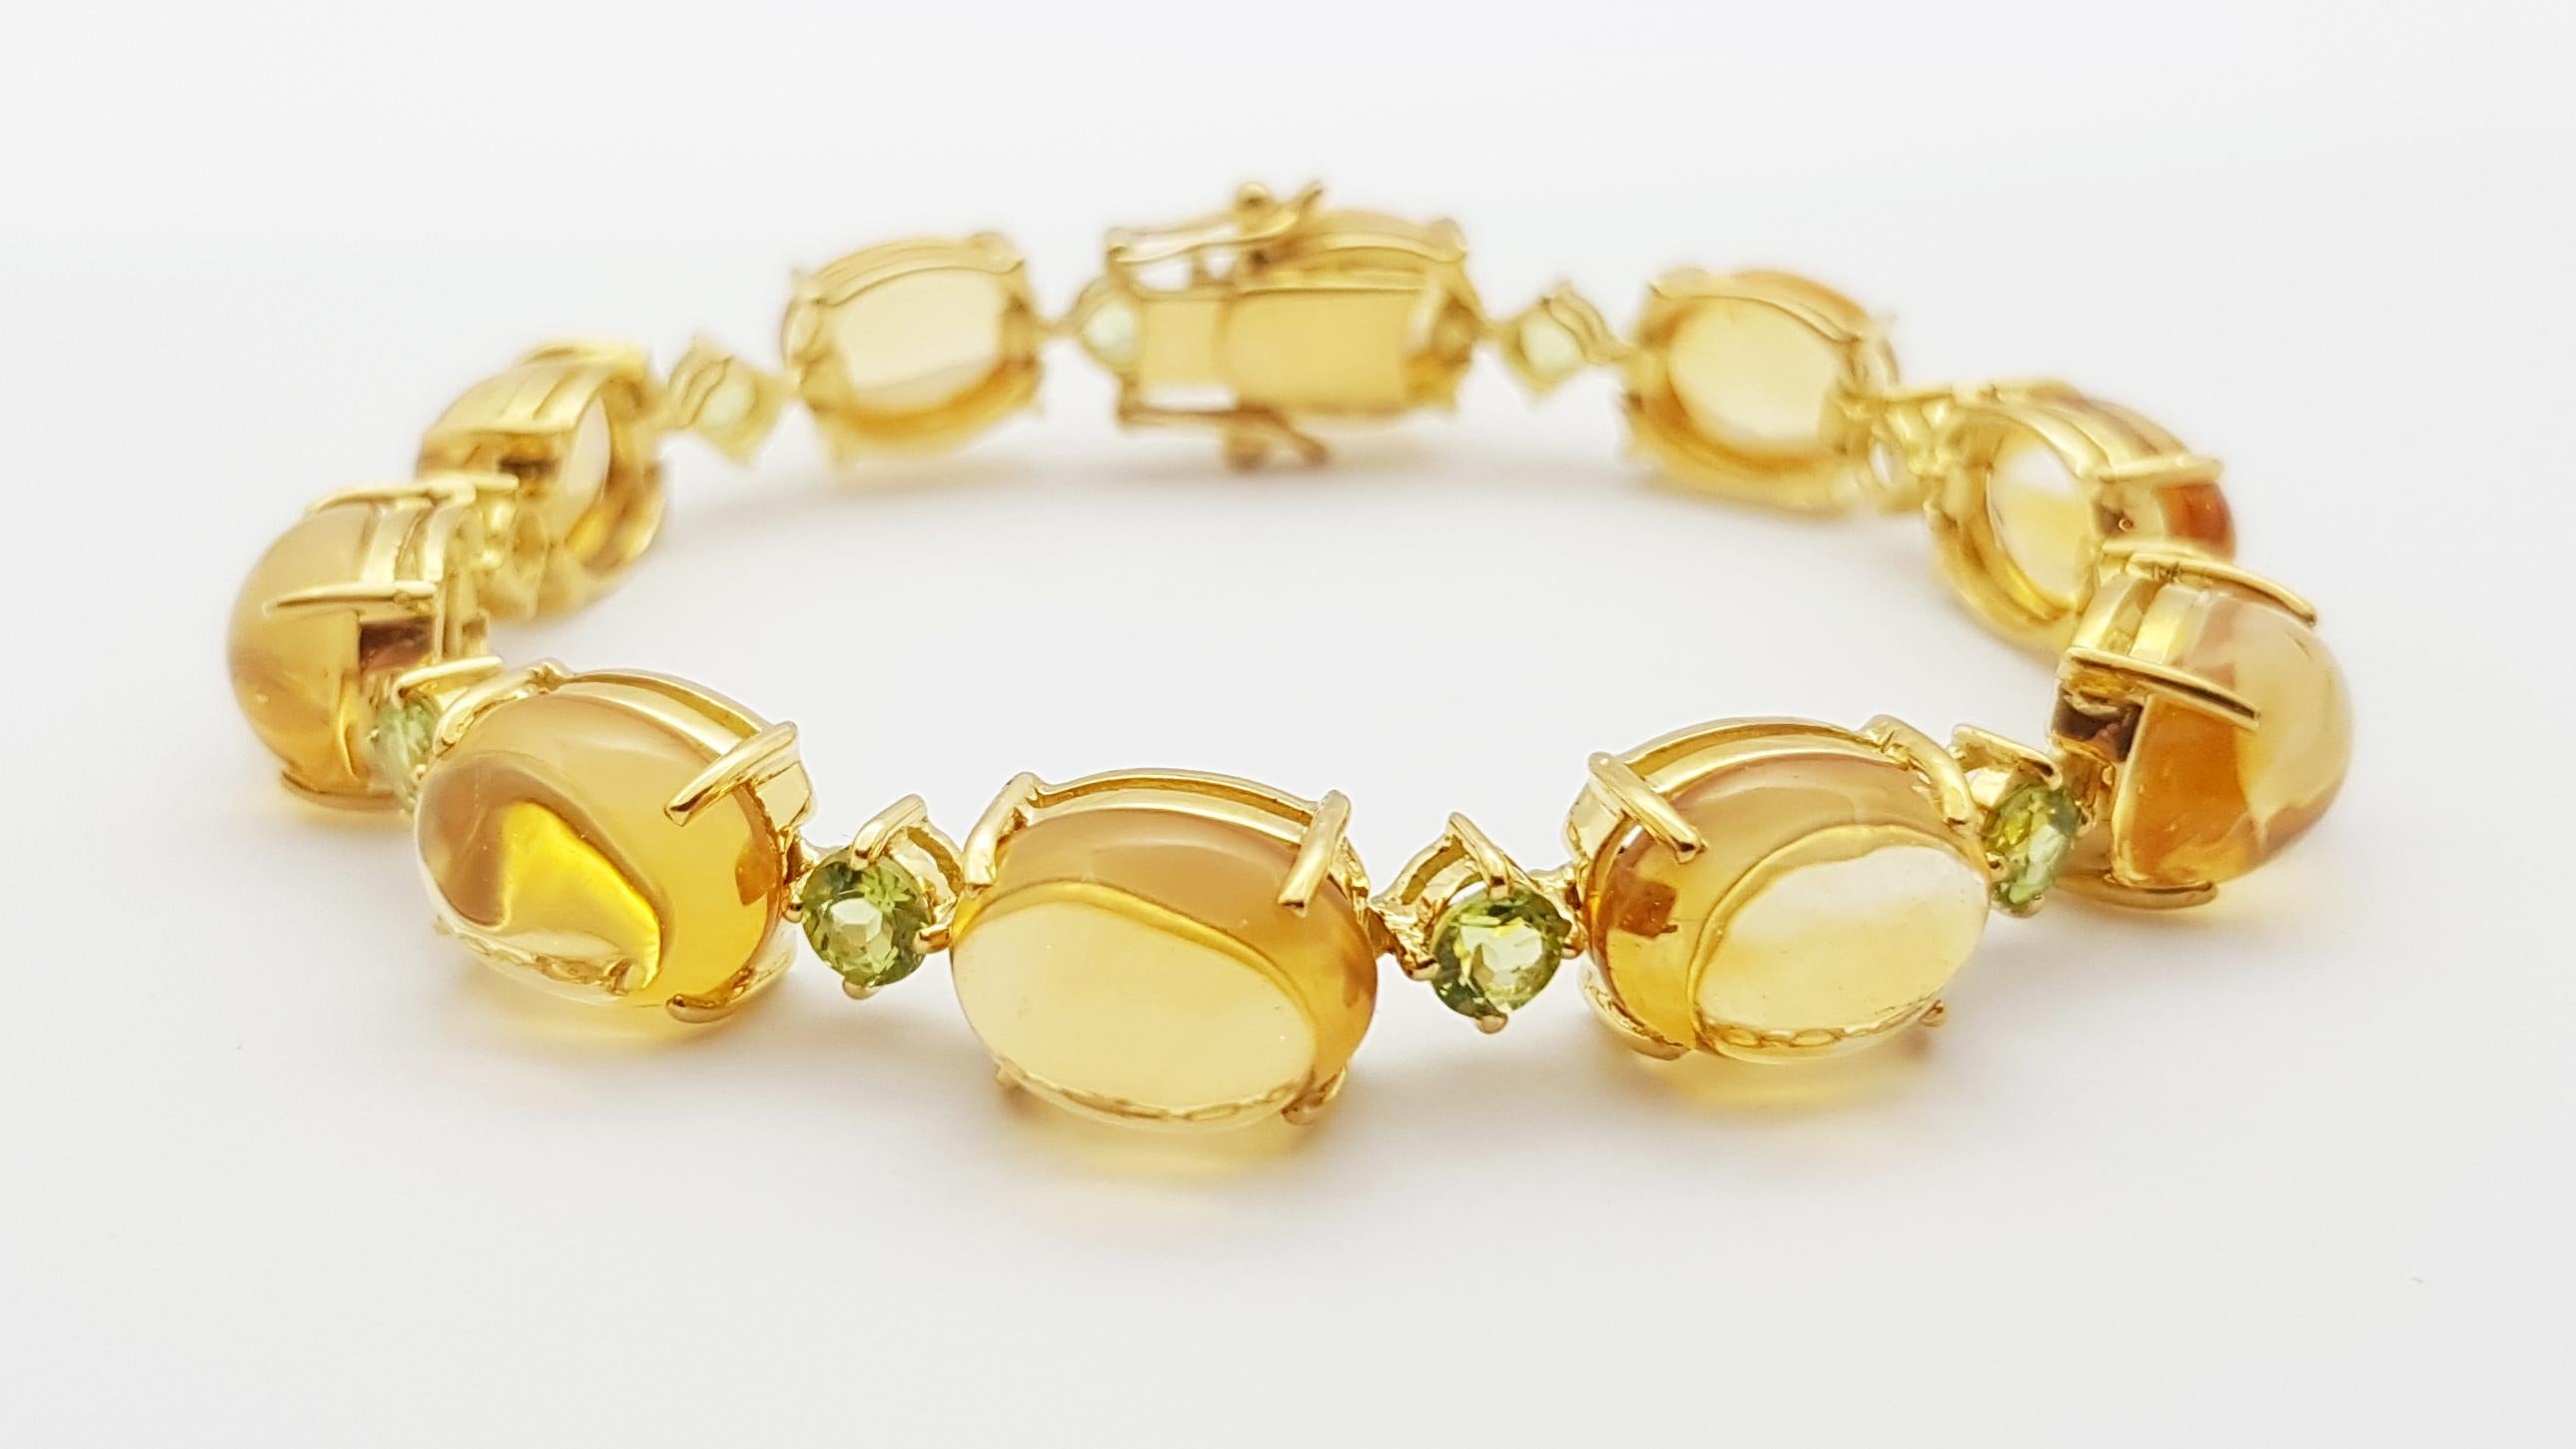 Cabochon Citrine with Peridot Bracelet set in 18 Karat Gold Settings For Sale 2